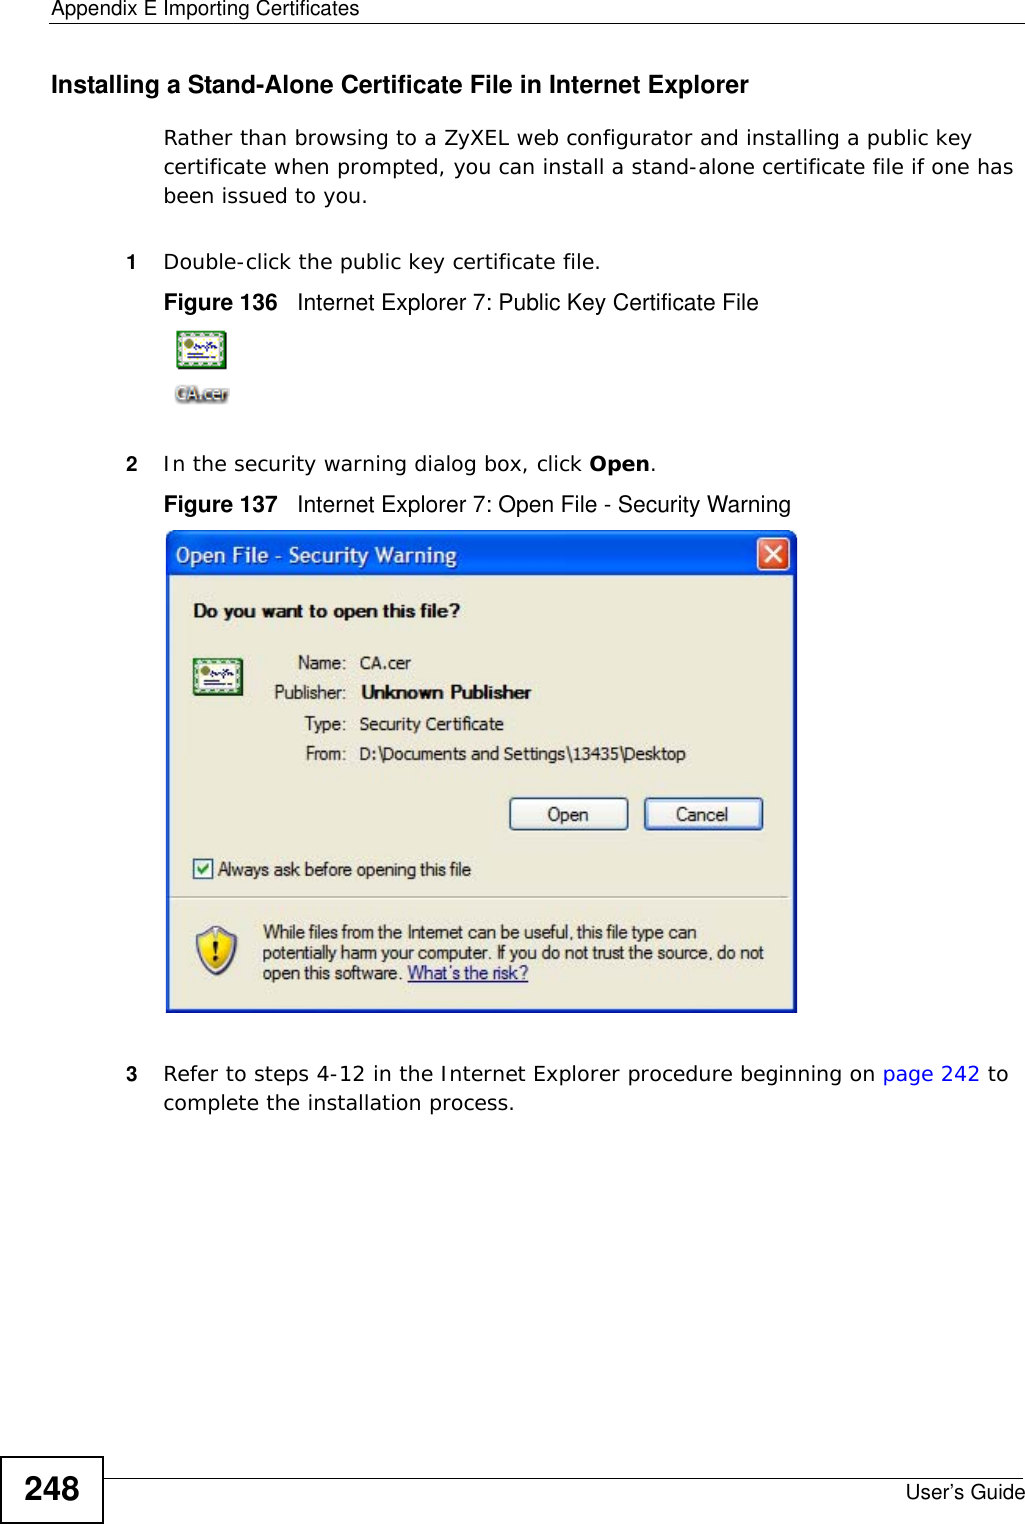 Appendix E Importing CertificatesUser’s Guide248Installing a Stand-Alone Certificate File in Internet ExplorerRather than browsing to a ZyXEL web configurator and installing a public key certificate when prompted, you can install a stand-alone certificate file if one has been issued to you.1Double-click the public key certificate file.Figure 136   Internet Explorer 7: Public Key Certificate File2In the security warning dialog box, click Open.Figure 137   Internet Explorer 7: Open File - Security Warning3Refer to steps 4-12 in the Internet Explorer procedure beginning on page 242 to complete the installation process.